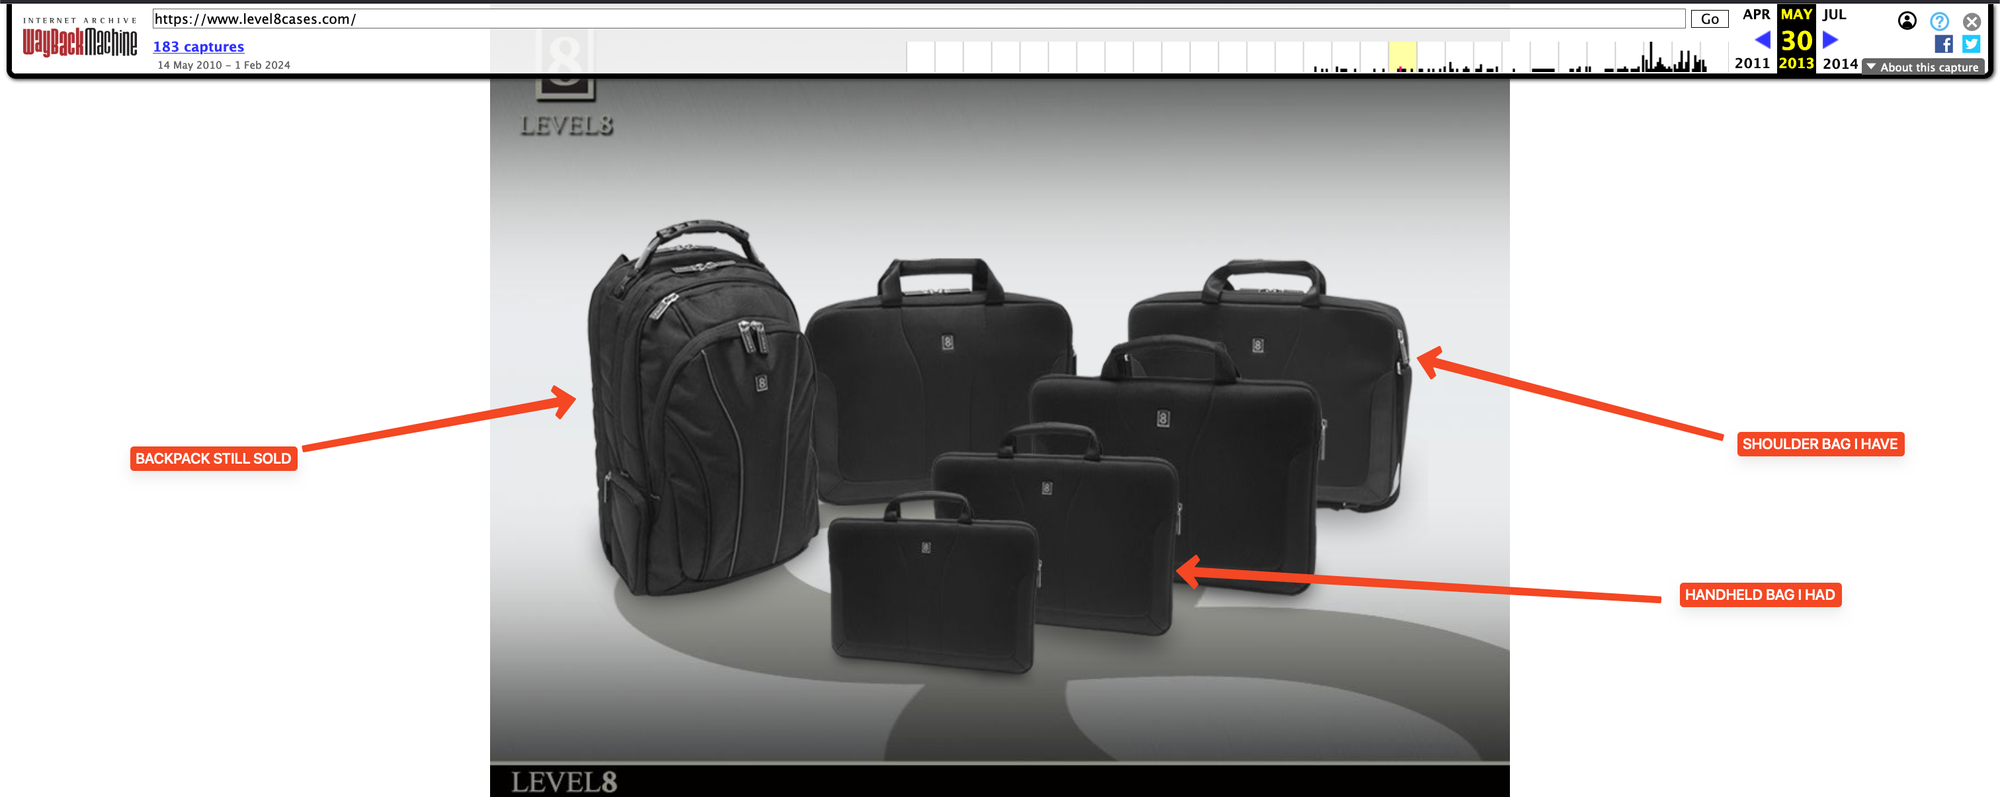 screenshot of the wayback machine, level8cases.com on 2013/5/30. Arrows point to the shoulder bag I have, the handbag I used to have, and the backpack still sold.